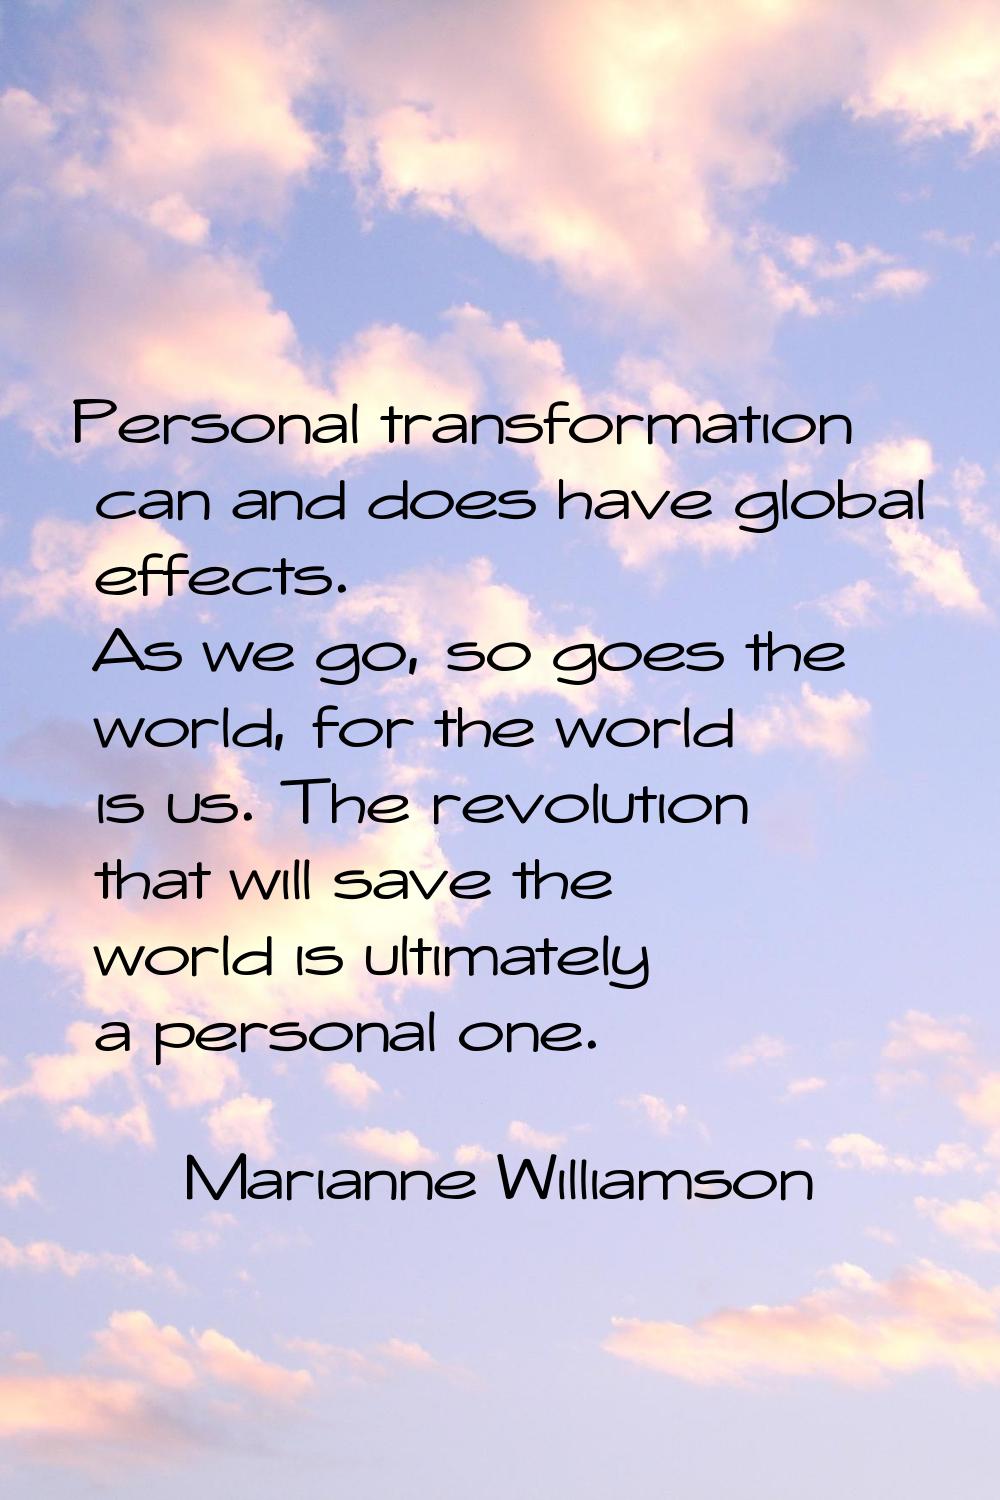 Personal transformation can and does have global effects. As we go, so goes the world, for the worl